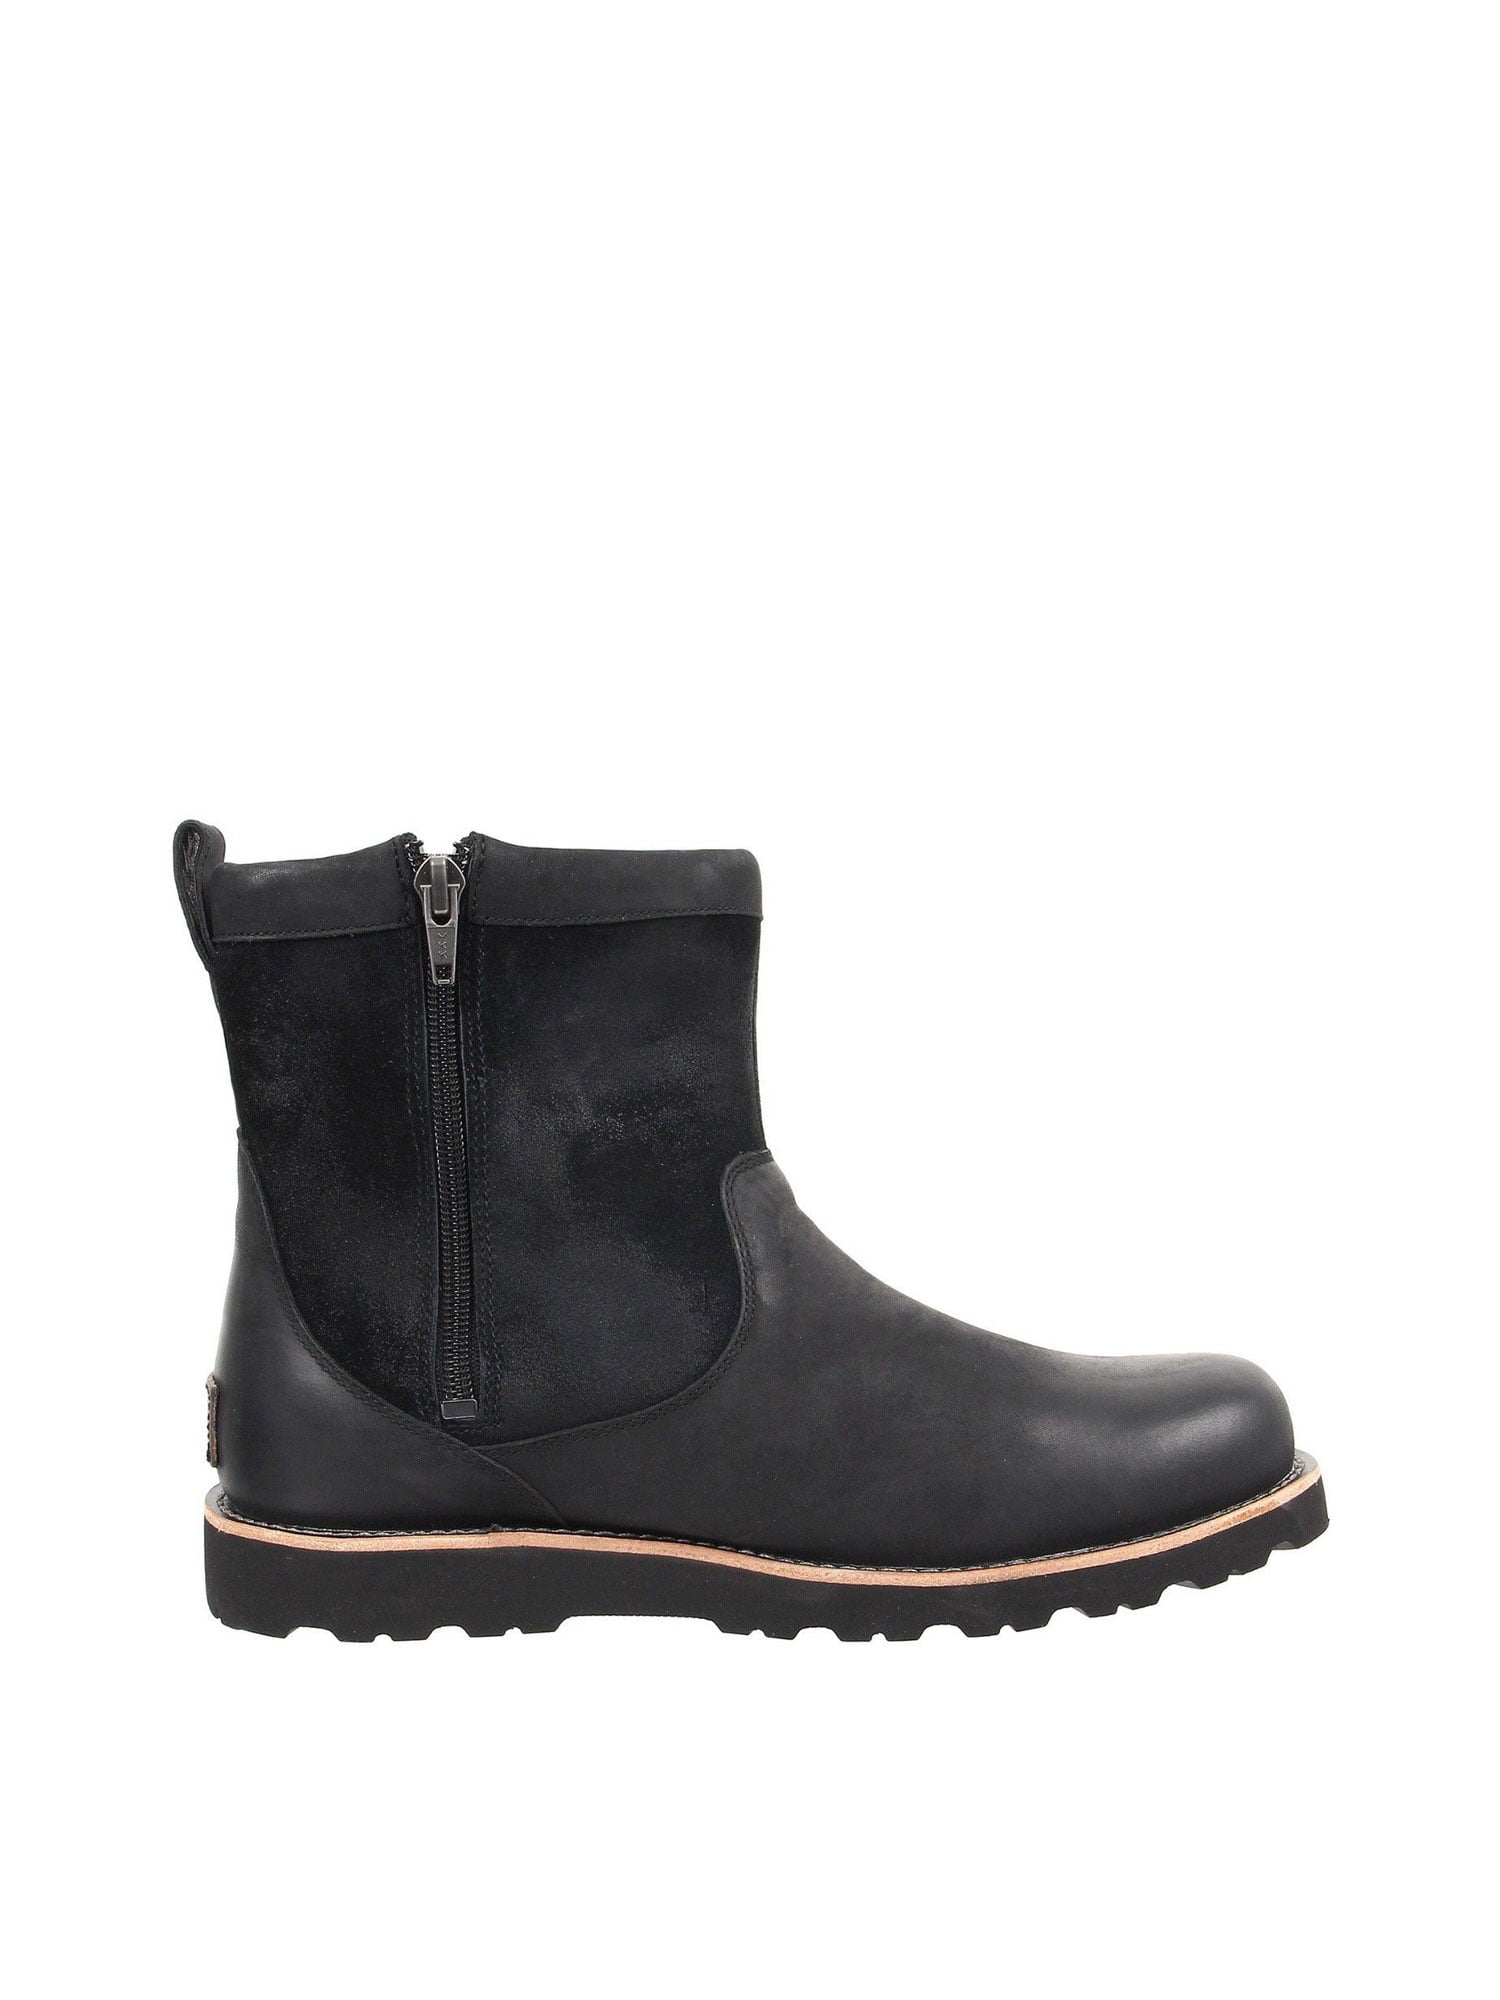 mens casual winter boots